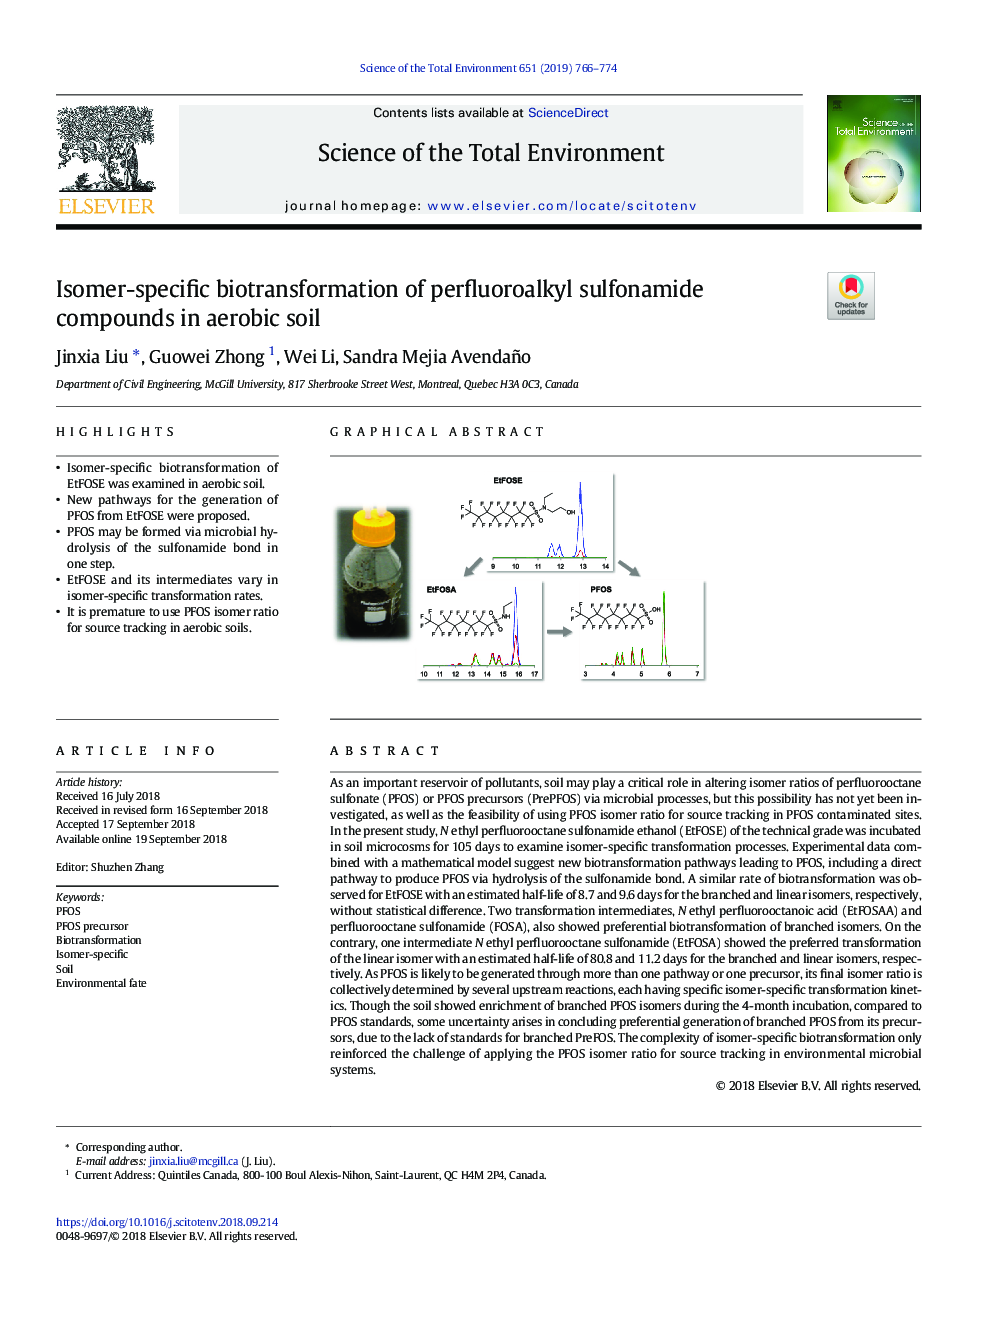 Isomer-specific biotransformation of perfluoroalkyl sulfonamide compounds in aerobic soil